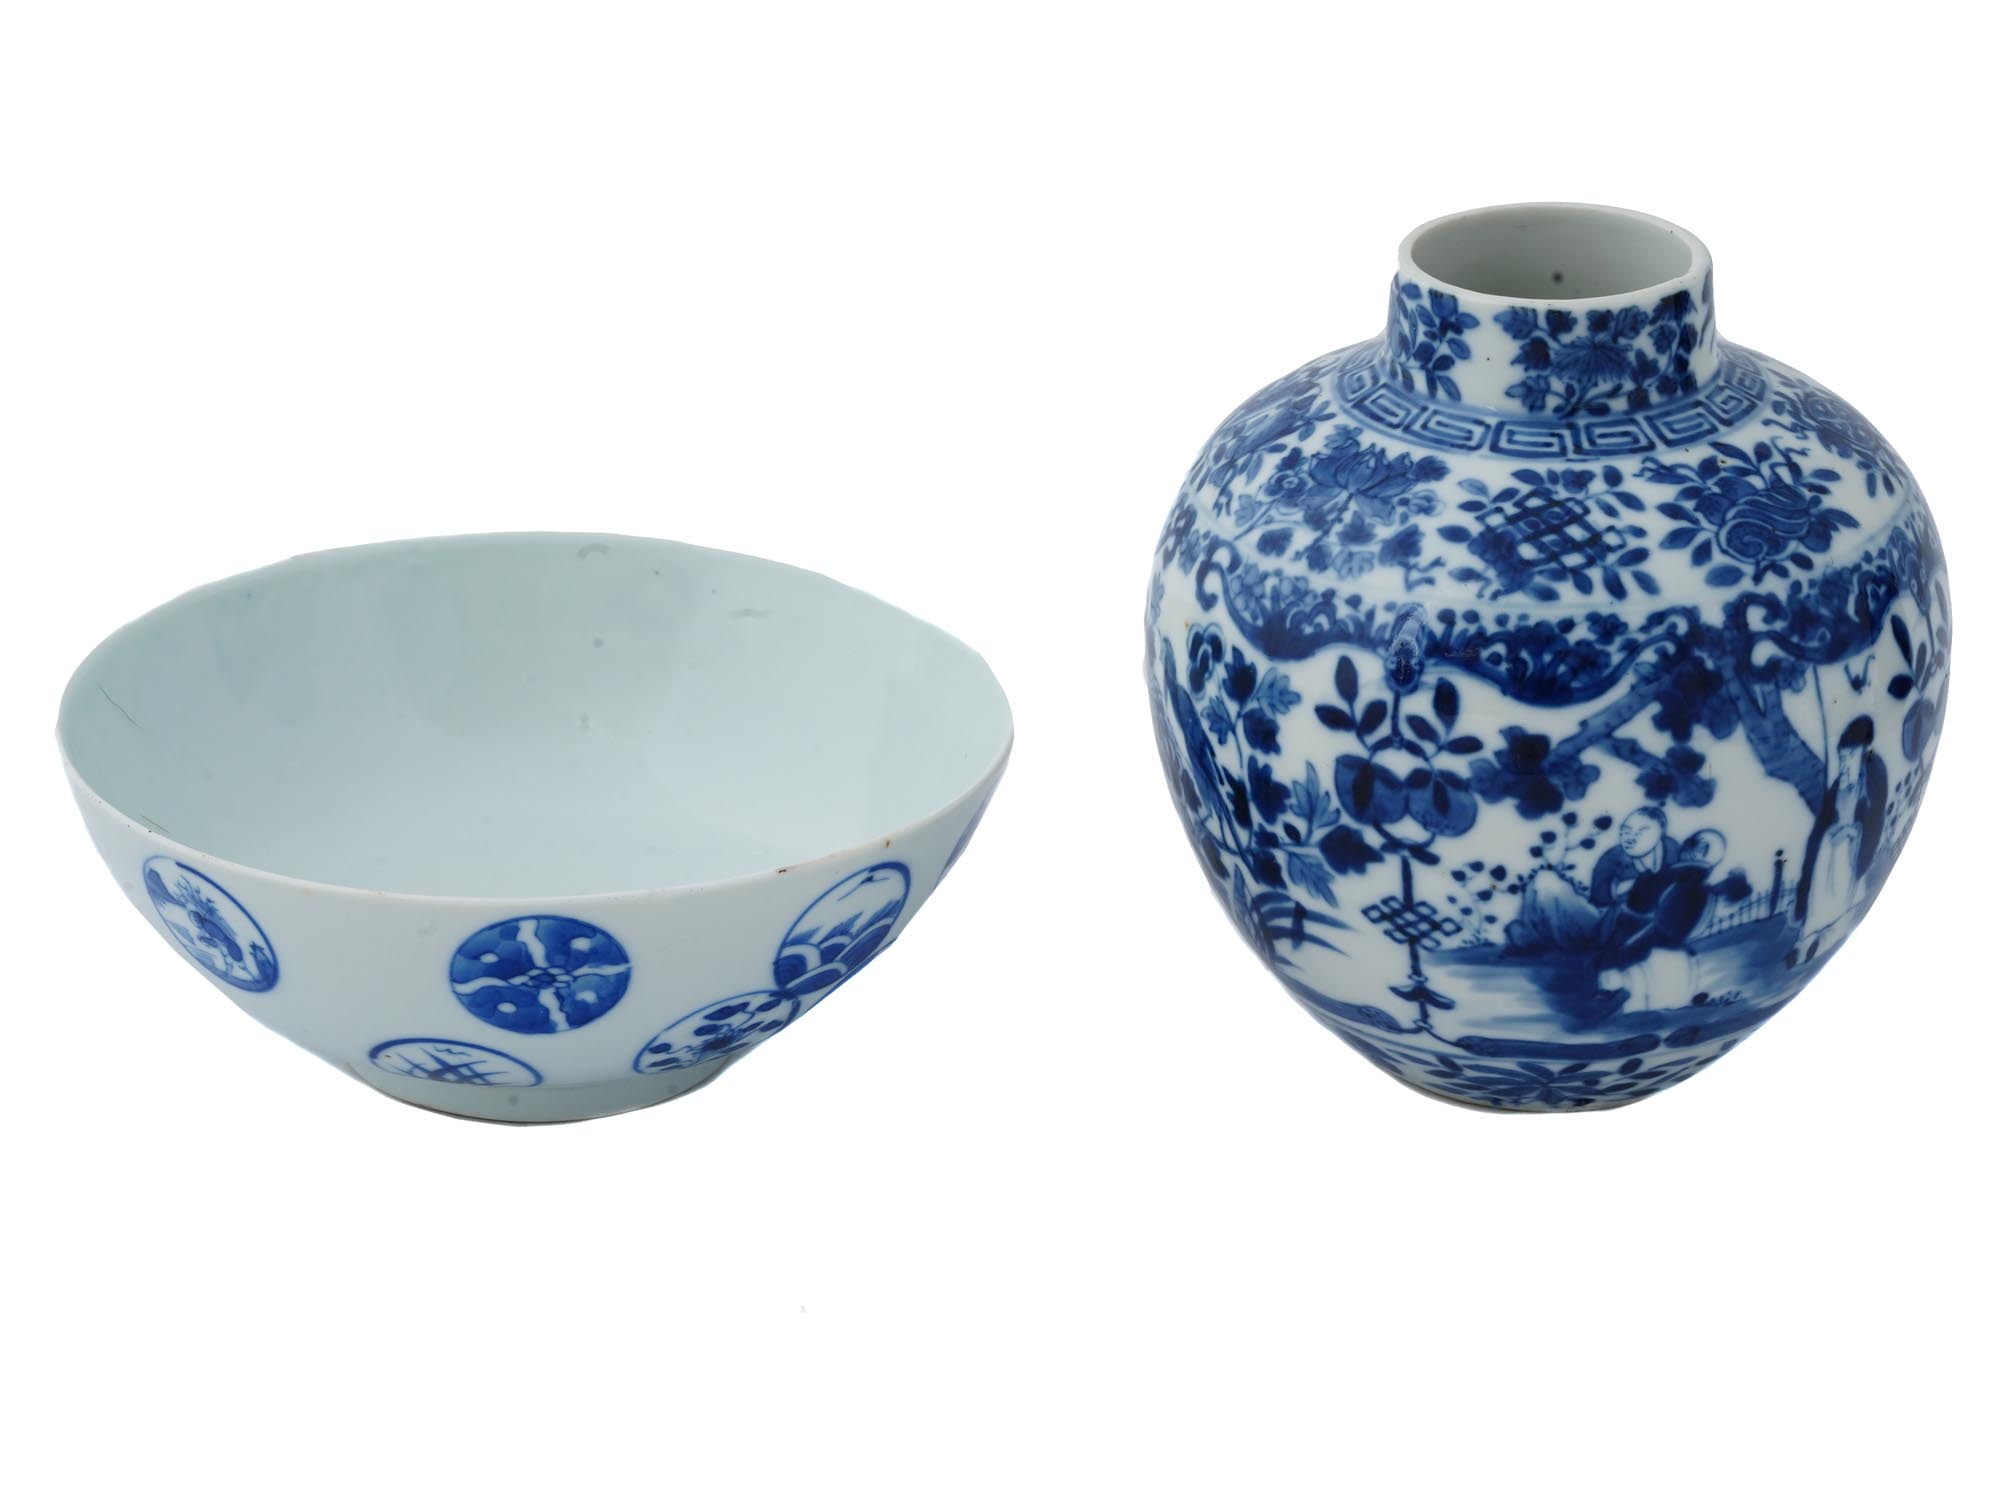 CHINESE QING BLUE AND WHITE PORCELAIN WARE MARKED PIC-0